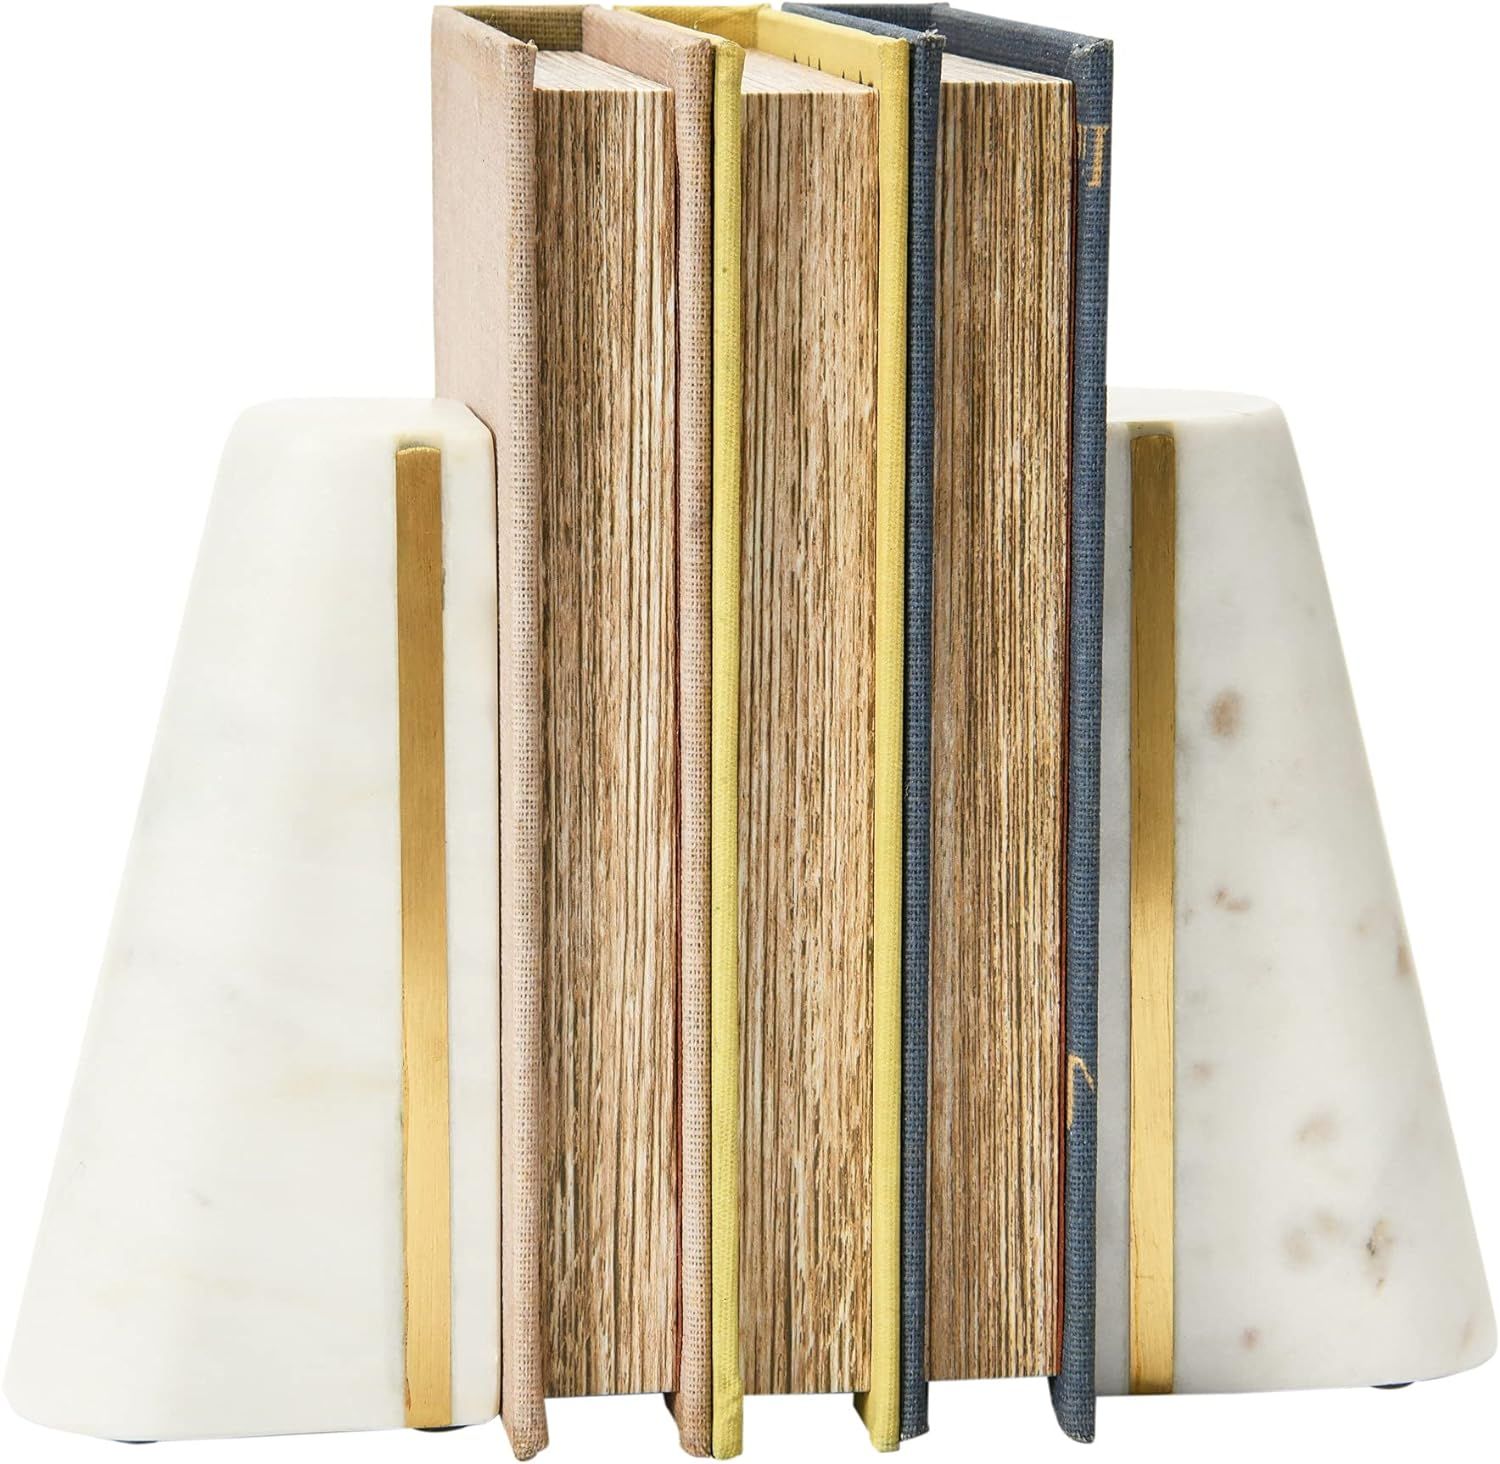 Main + Mesa Geometric Marble Bookends with Brass Inlay, White, Set of 3 | Amazon (US)